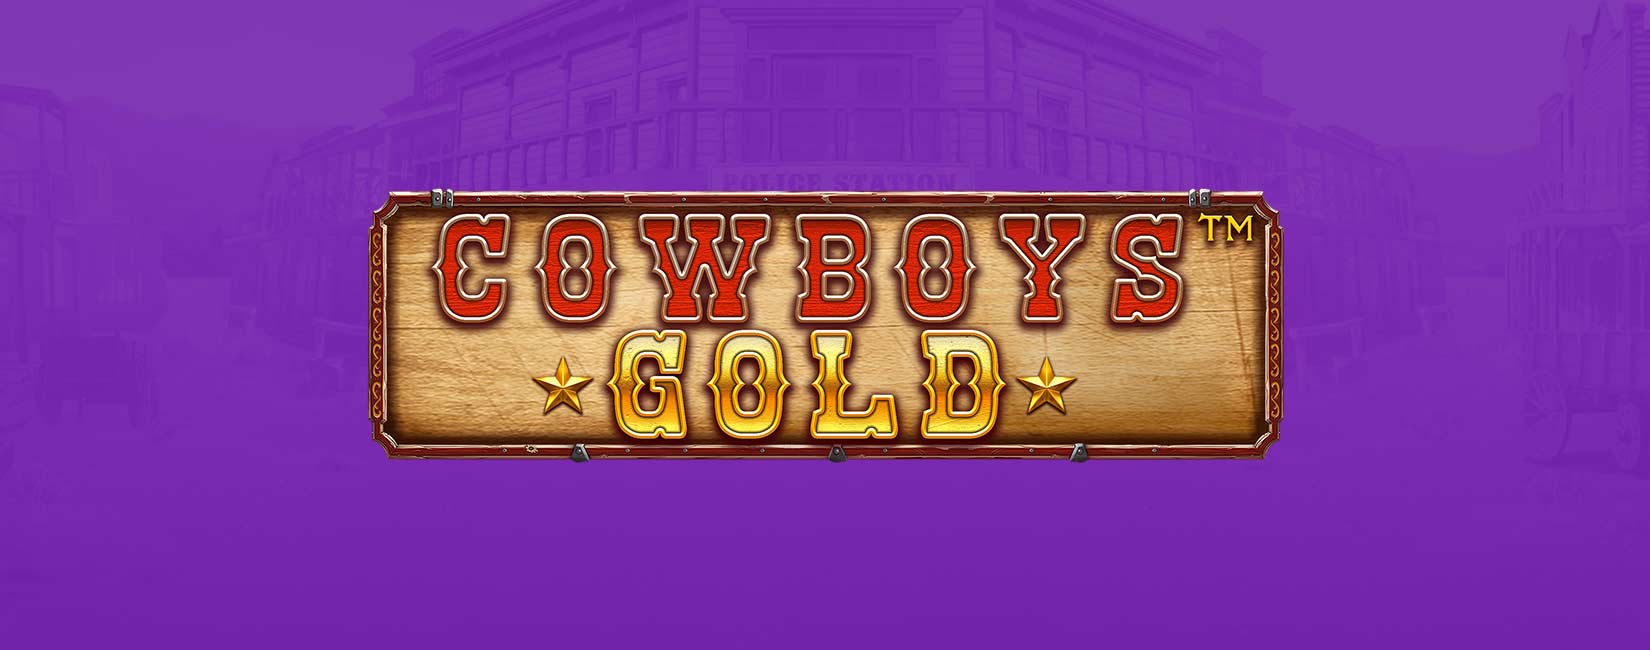 CRE-287831-GC-January Reviews Digital Design Cowboys Gold-Page Banner-1650x650